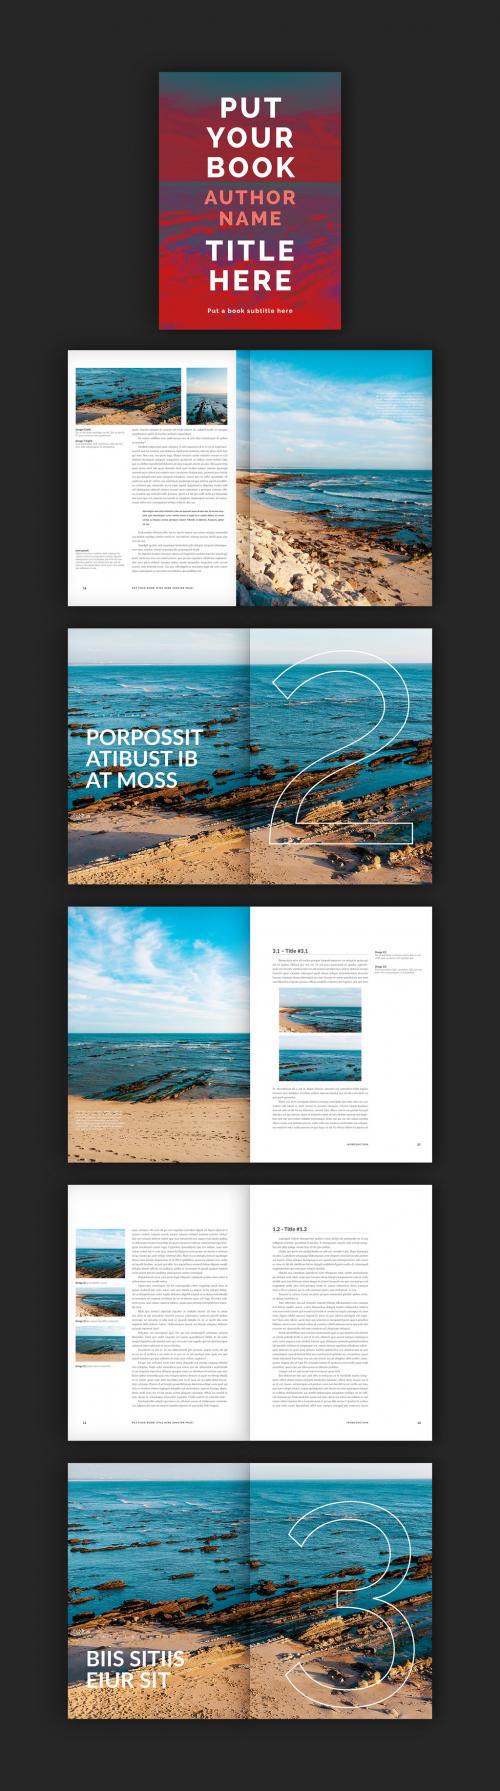 Adobe Stock - Book Layout with Large Chapter Numbers - 176886881